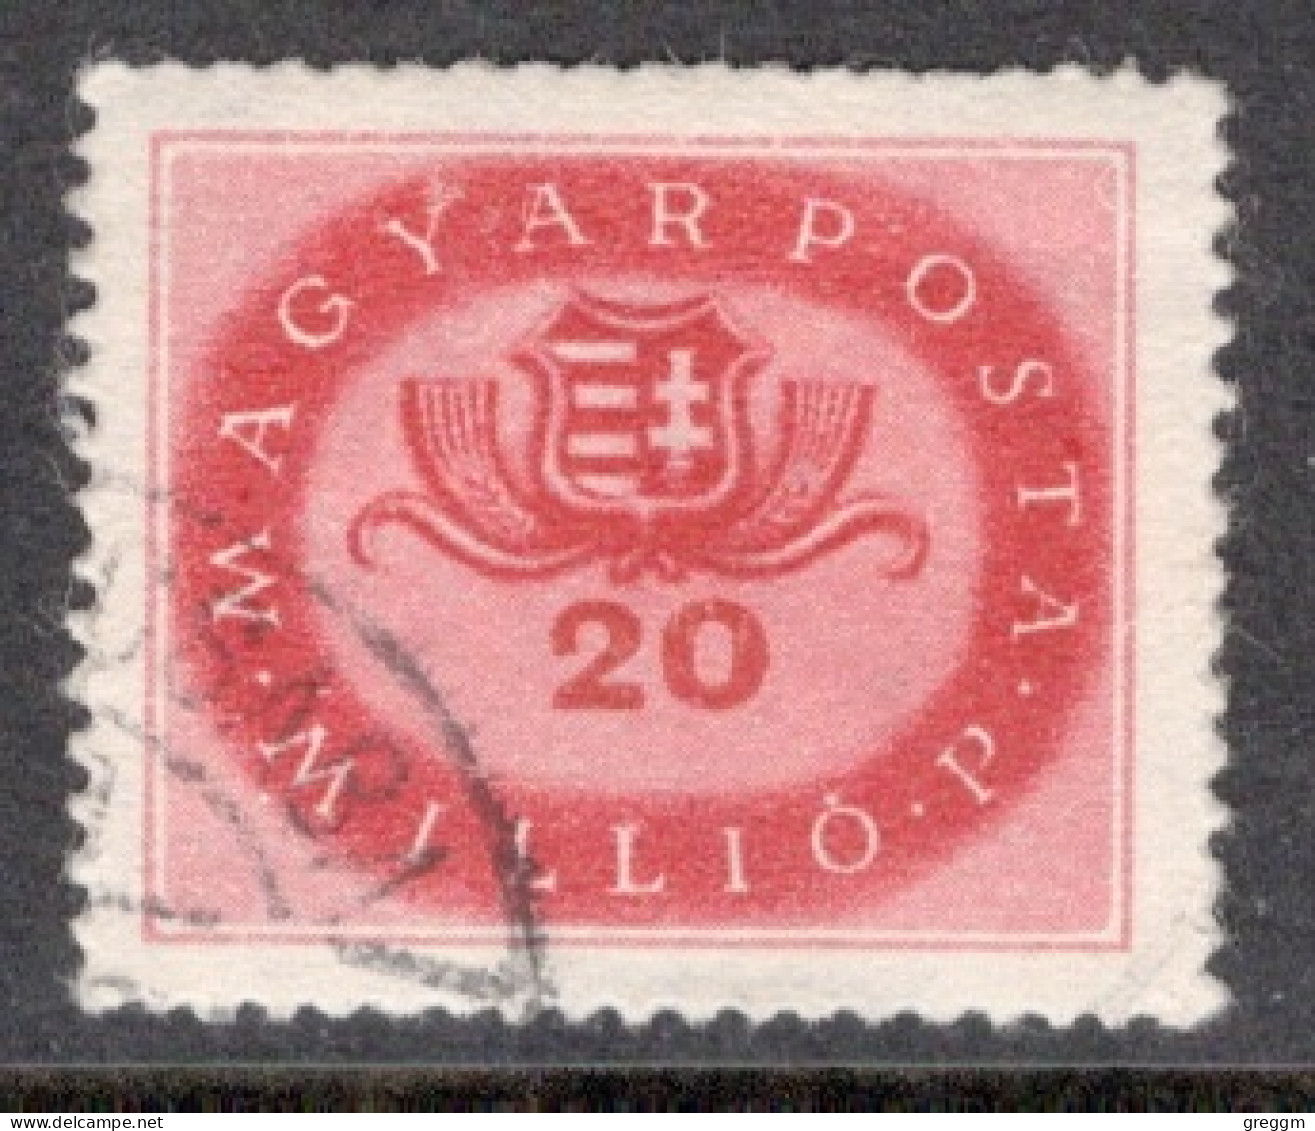 Hungary 1946  Single Stamp Coat Of Arms In Fine Used - Oblitérés